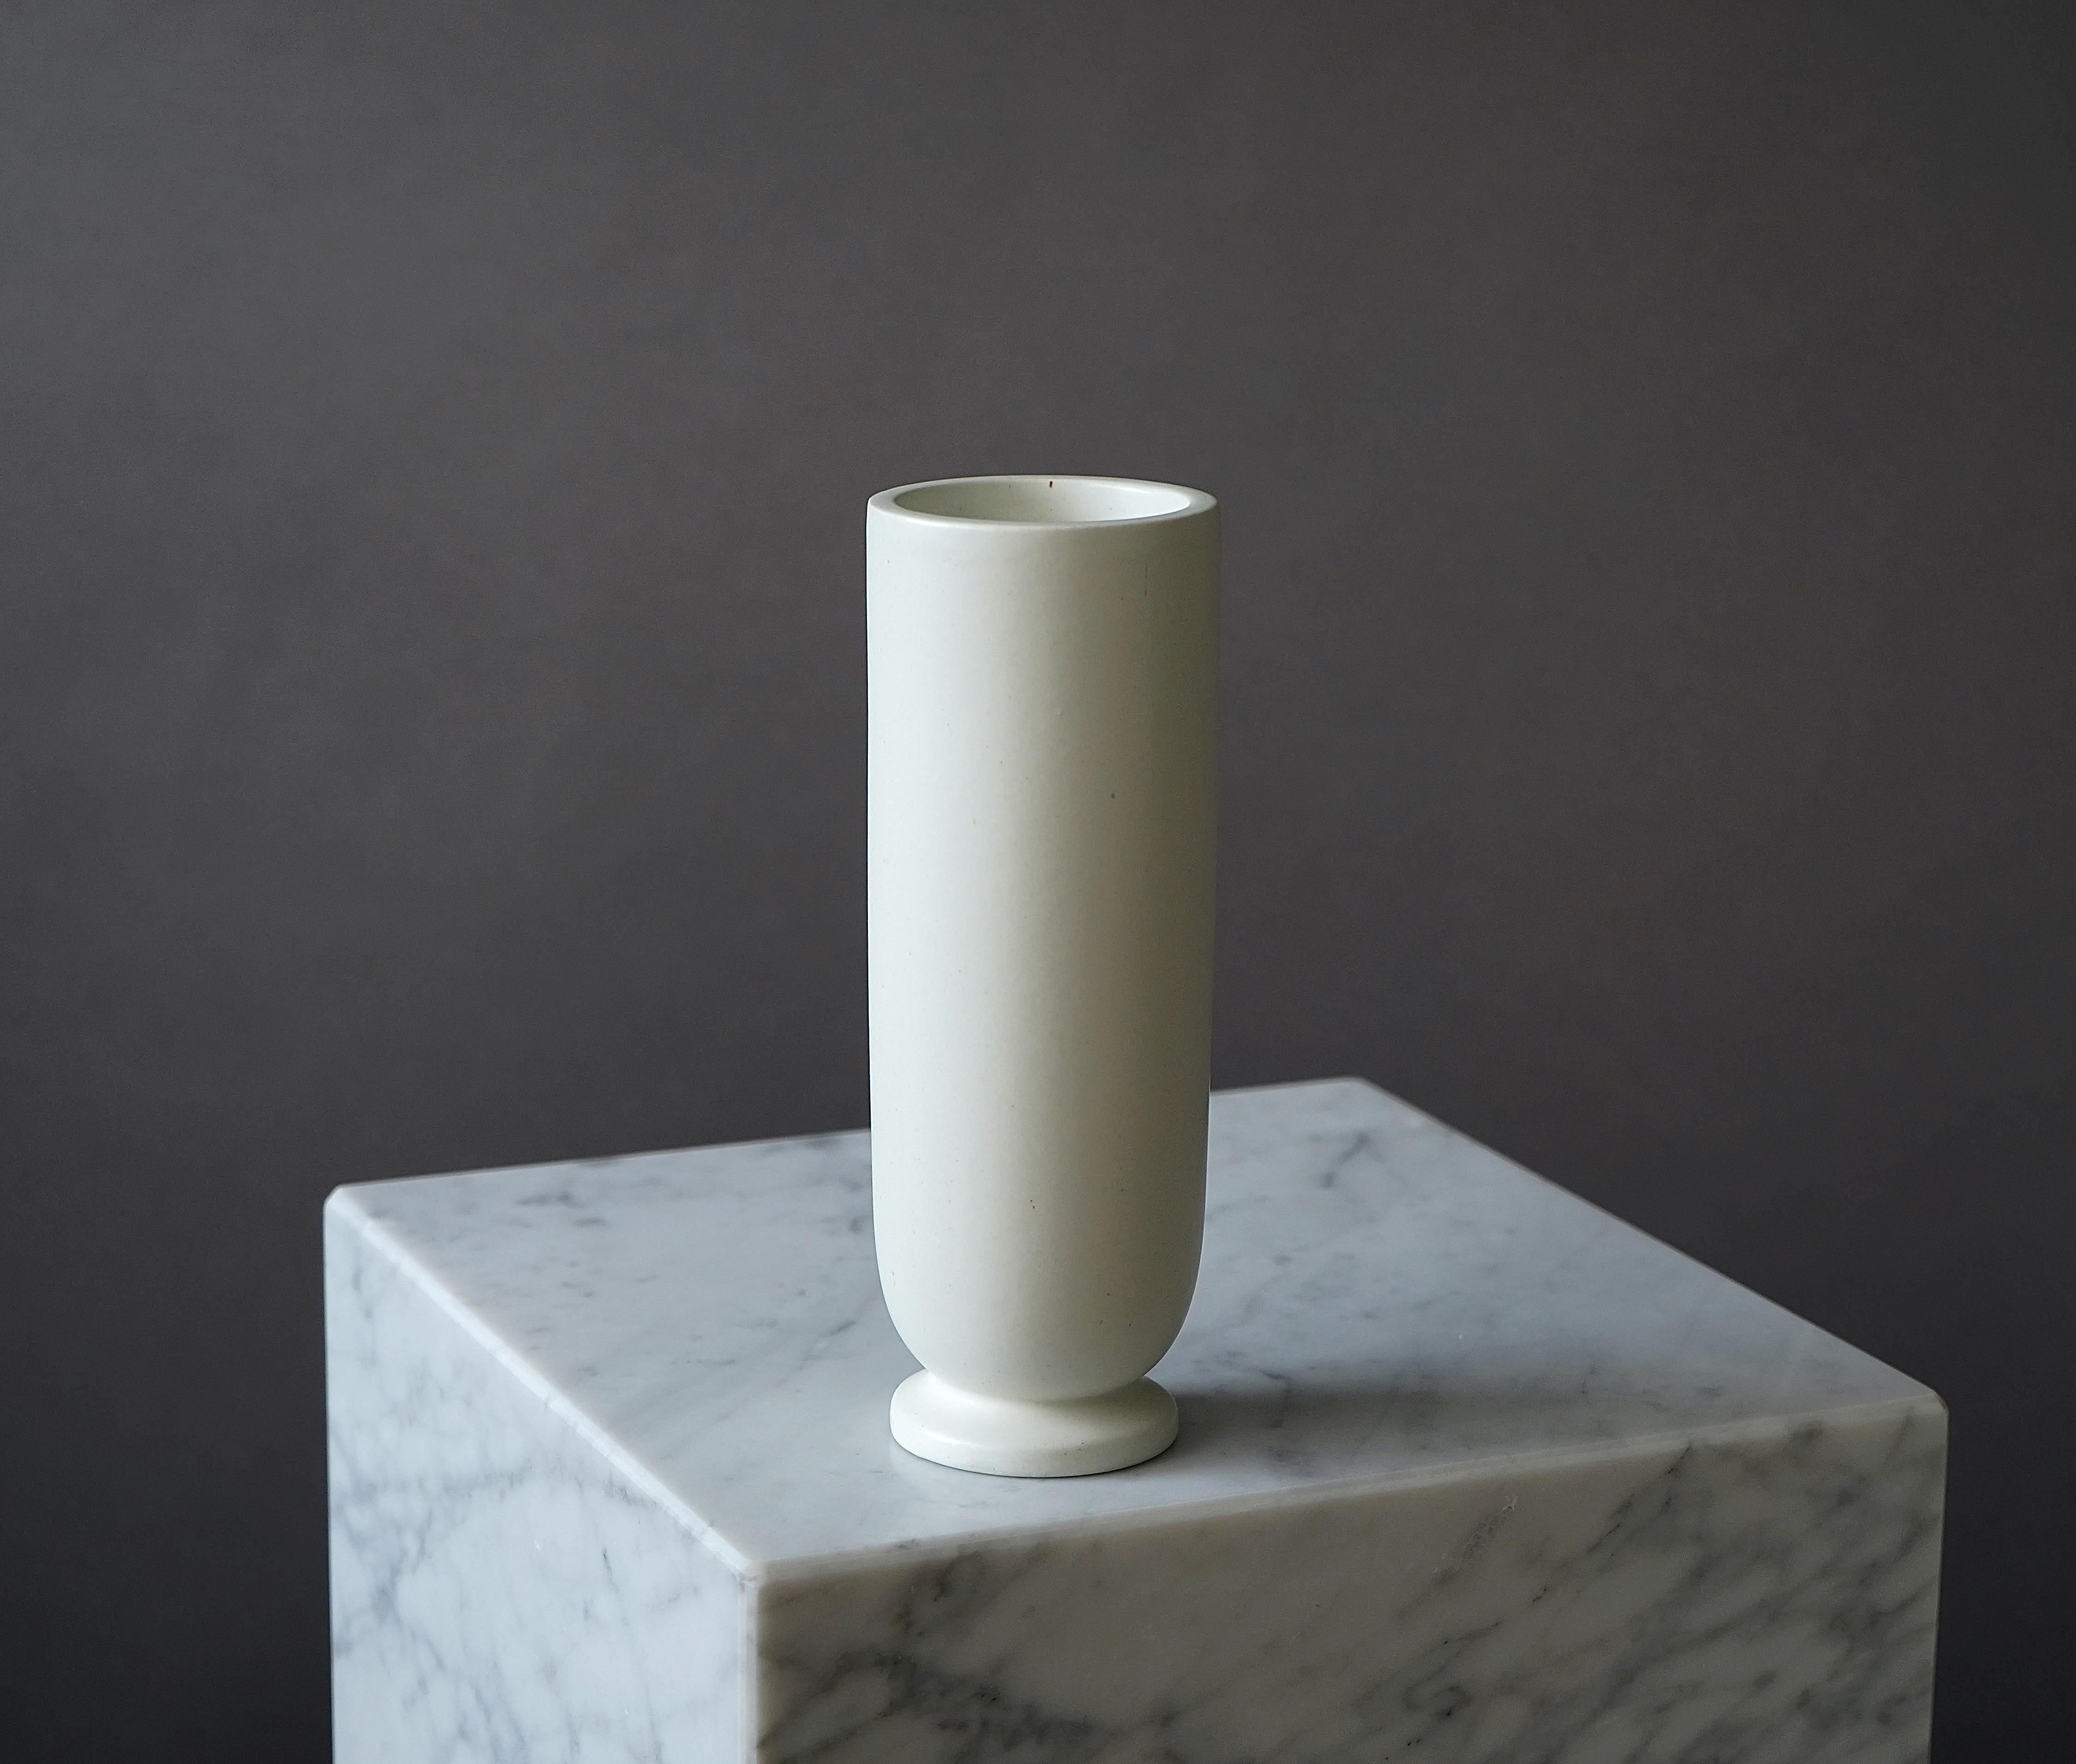 A beautiful 'Swedish Modern' stoneware vase with 'Carrara' glaze.
Made by Wilhelm Kåge at Gustavsberg in Sweden, 1930s. 

Excellent condition. 
Stamped 'Gustavsberg / CARRARA'.

Wilhelm Kåge was a Swedish artist, painter, and ceramicist. Between